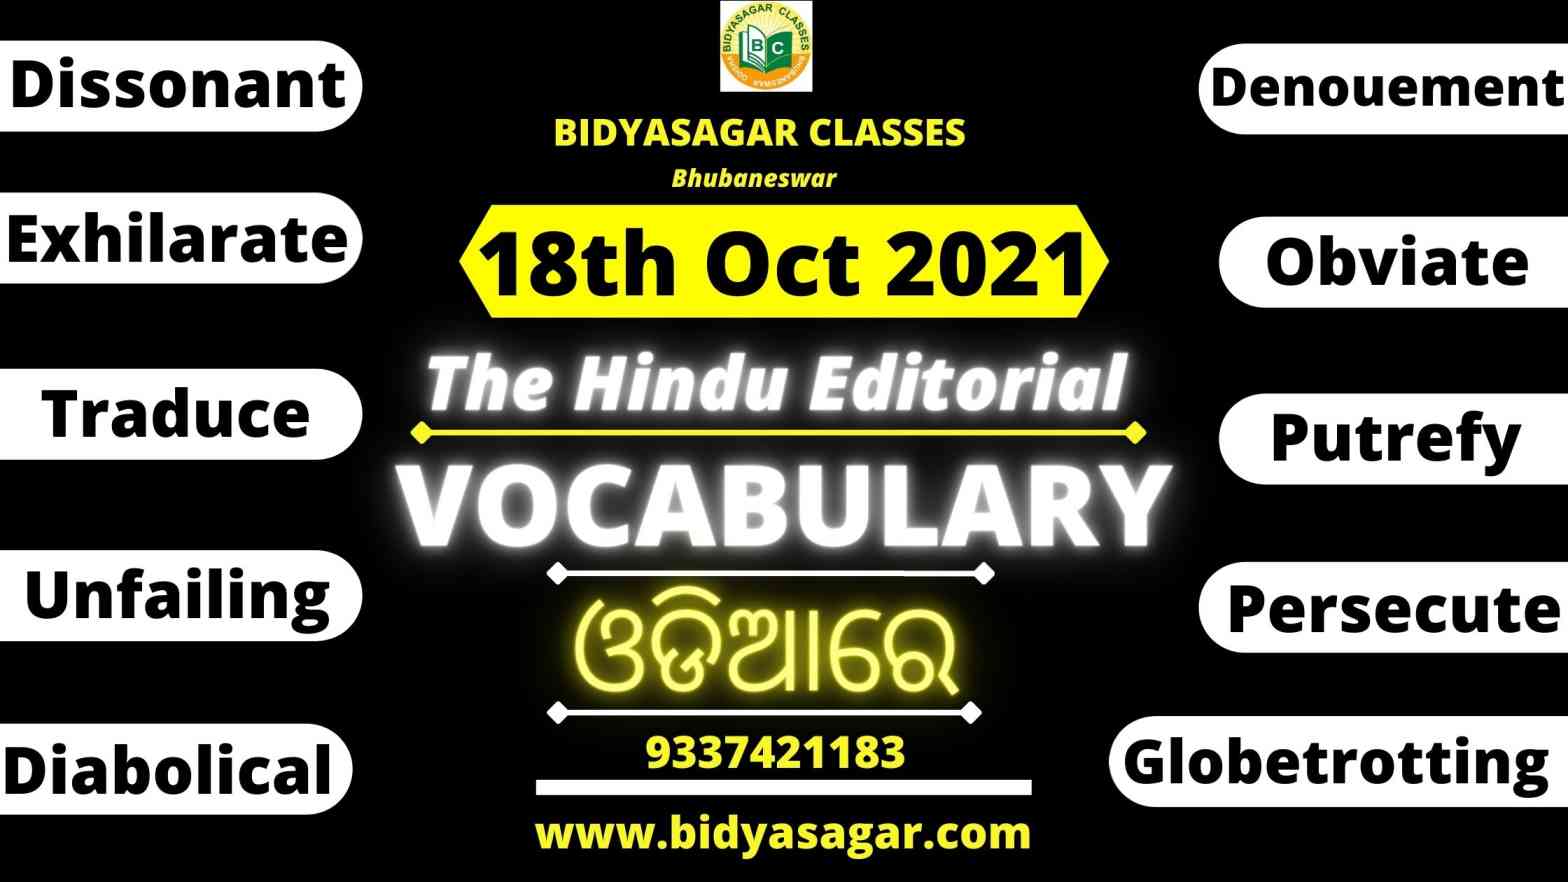 The Hindu Editorial Vocabulary of 18th October 2021